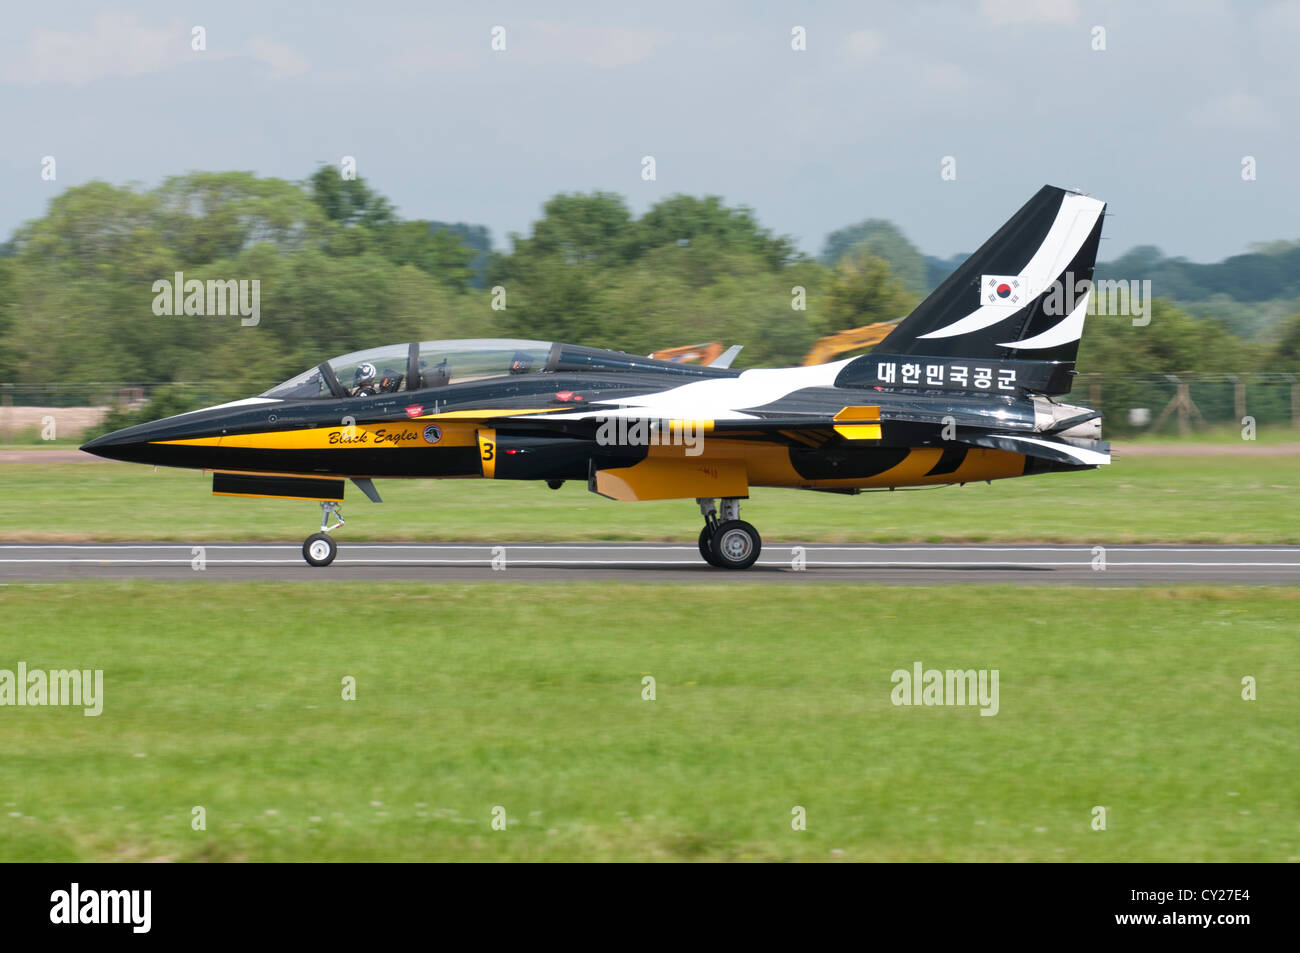 A Korean T-50B Golden Eagle Military Jet Trainer from the Black Eagles display team slows down after landing at the 2012 RIAT Stock Photo